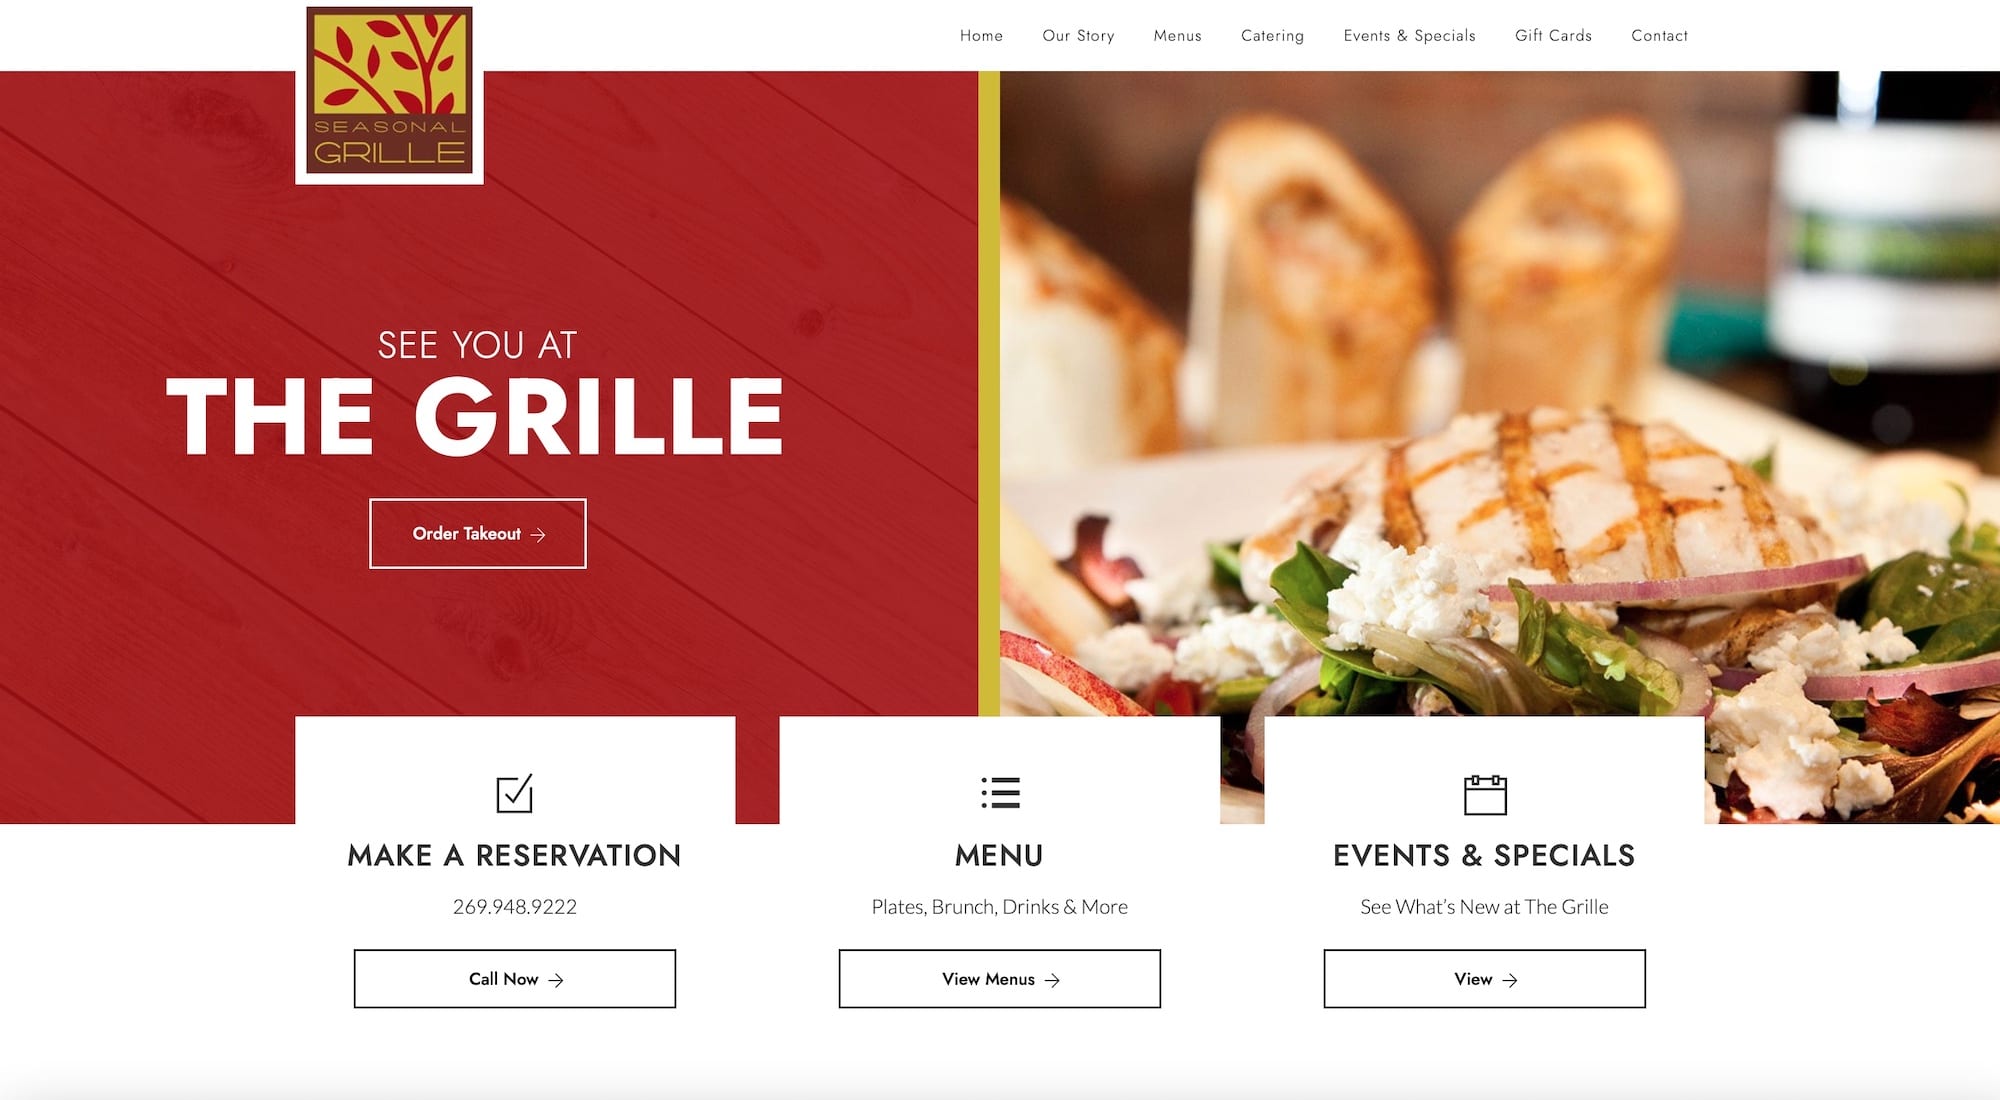 Seasonal Grille Featured